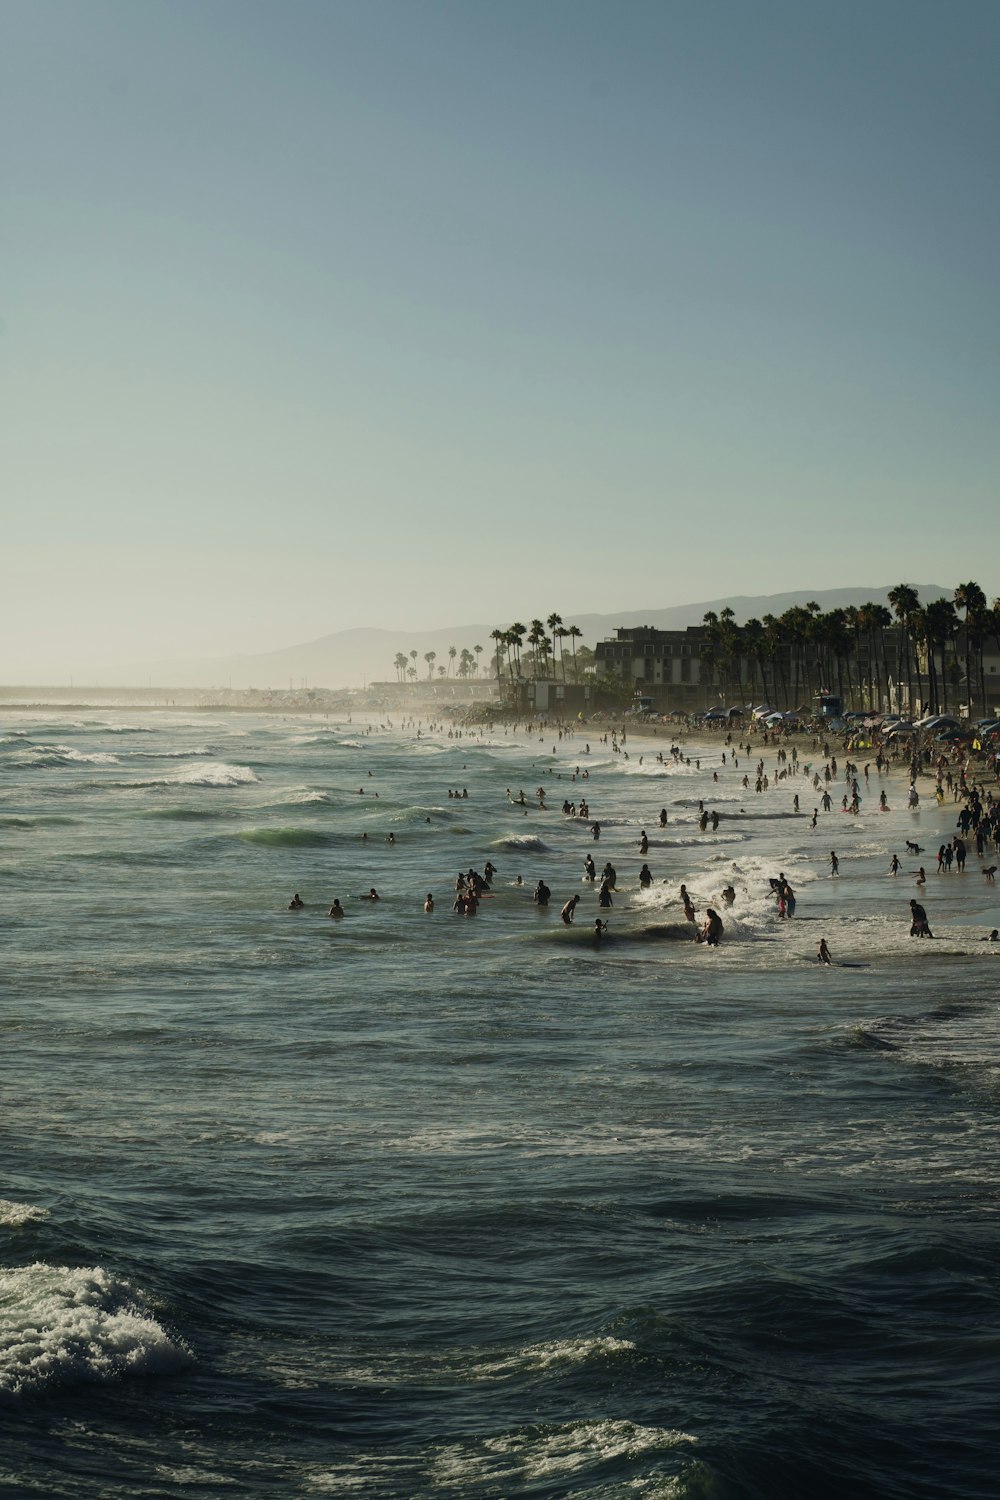 a crowded beach with people swimming in the ocean